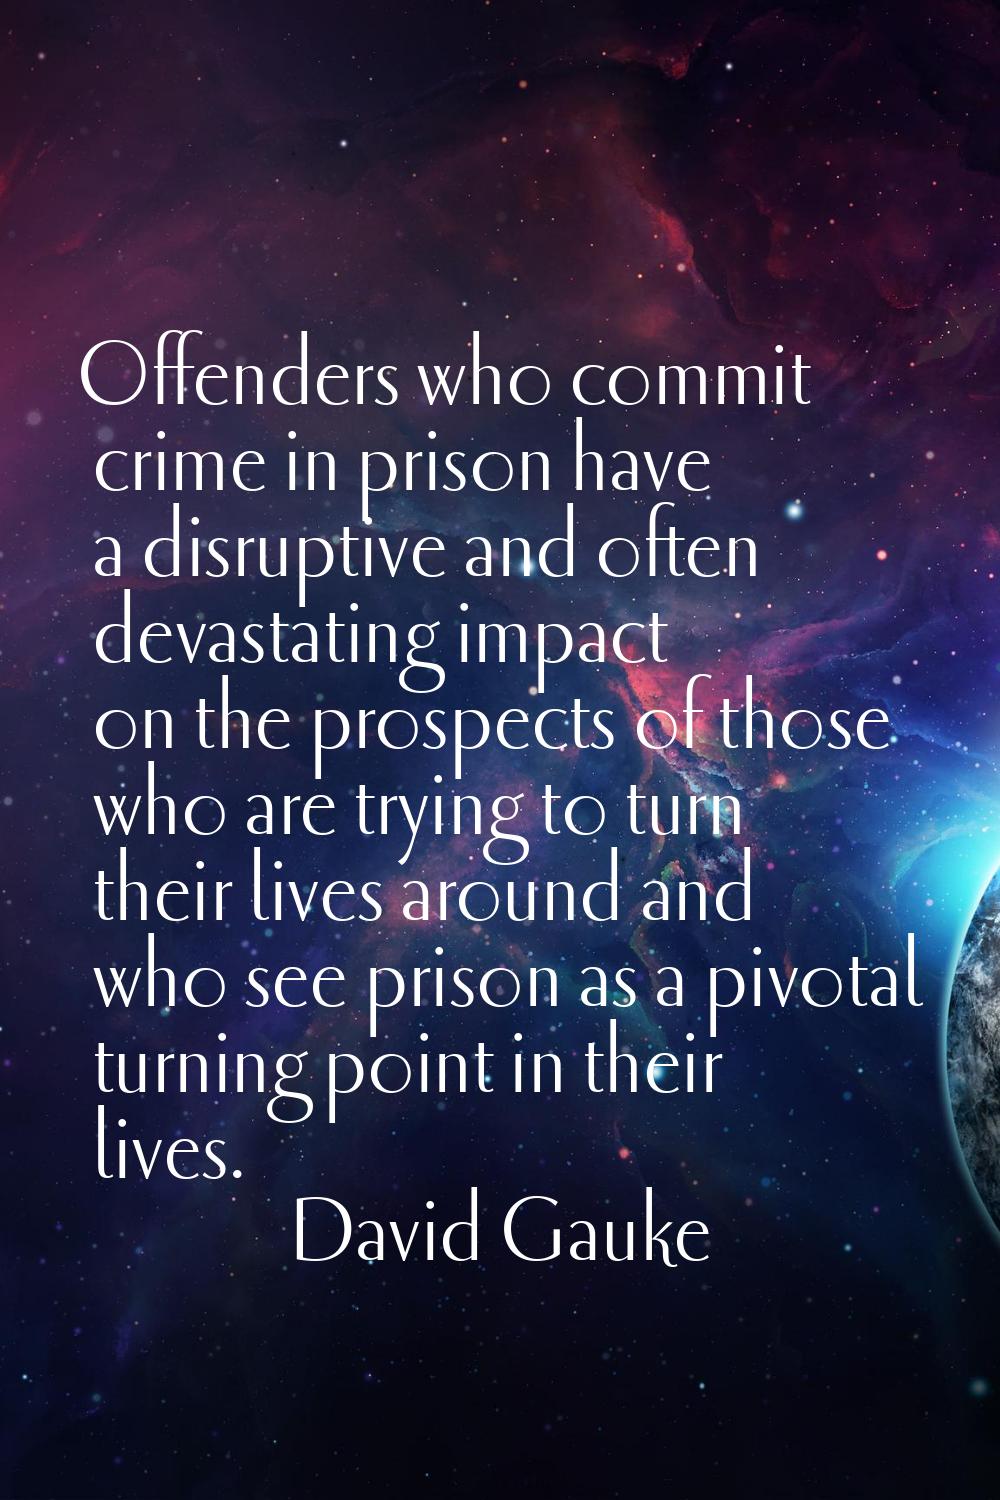 Offenders who commit crime in prison have a disruptive and often devastating impact on the prospect